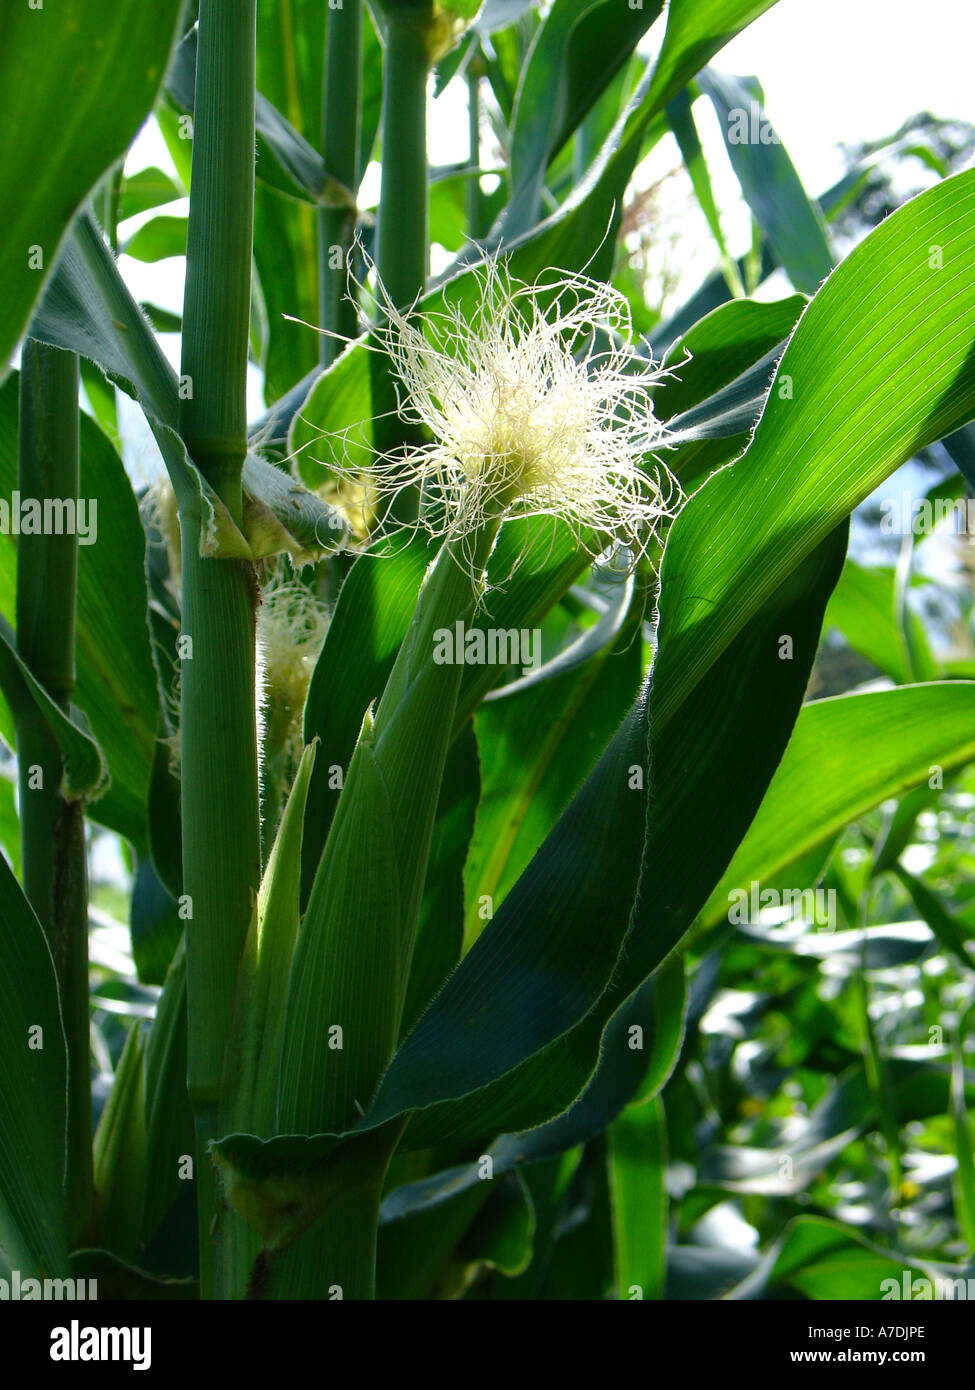 Green field of lush productive corn (maize) plants with ears and silk in Copperbelt region of Zamia, Southern Africa Stock Photo